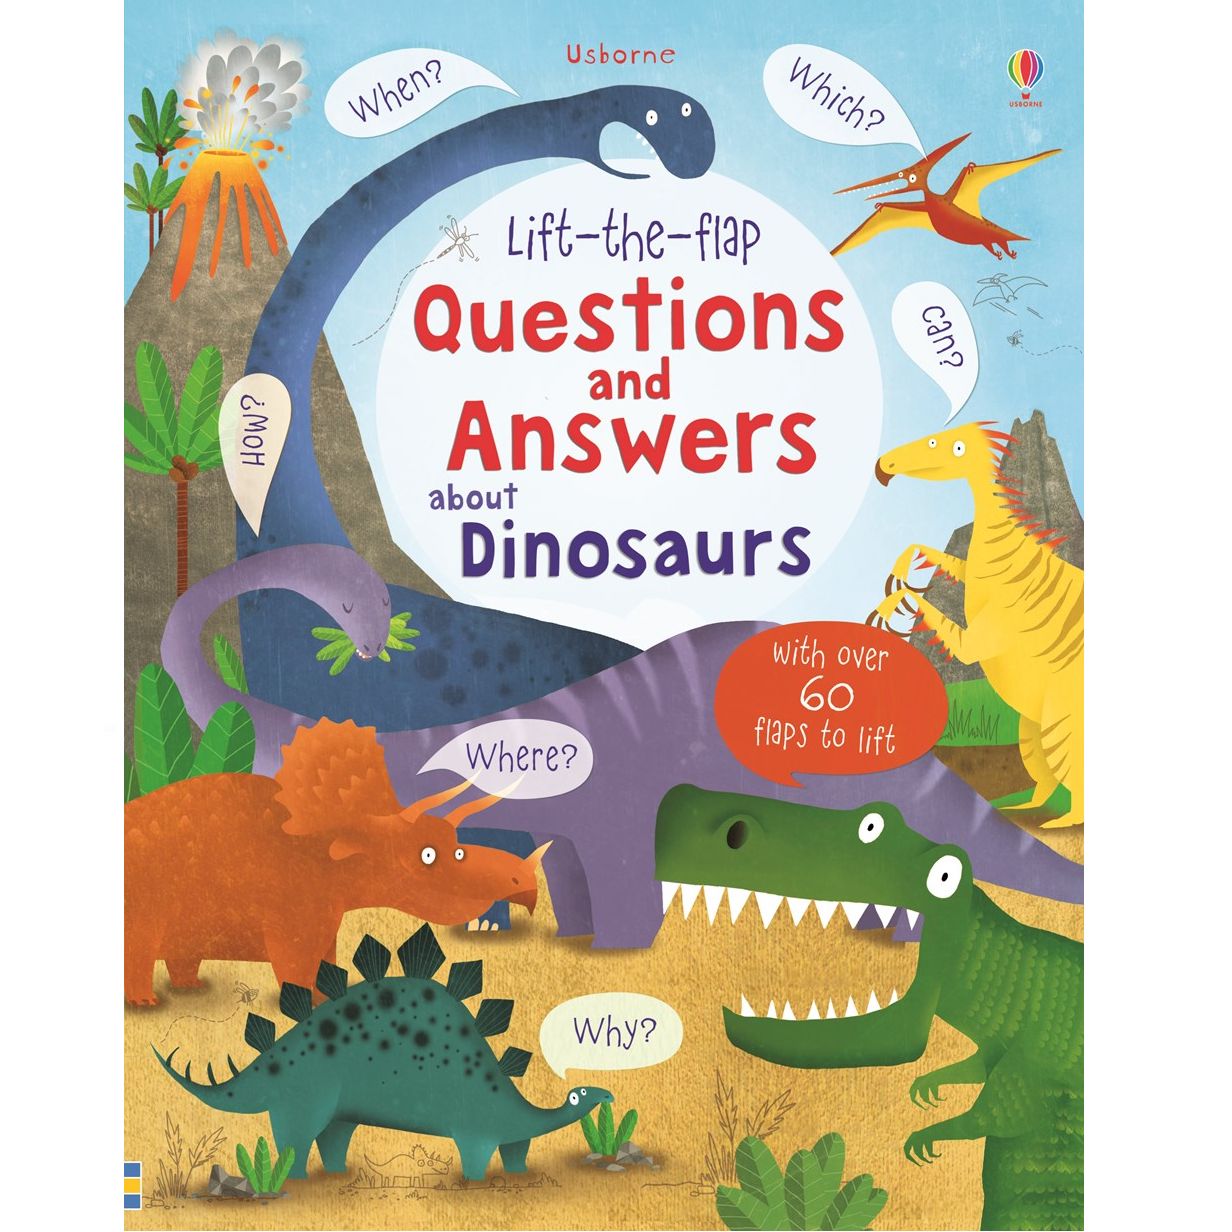 >USBORNE Lift-the-Flap Questions and Answers About Dinosaurs (4Y&Up) 978-0-7945-3447-9